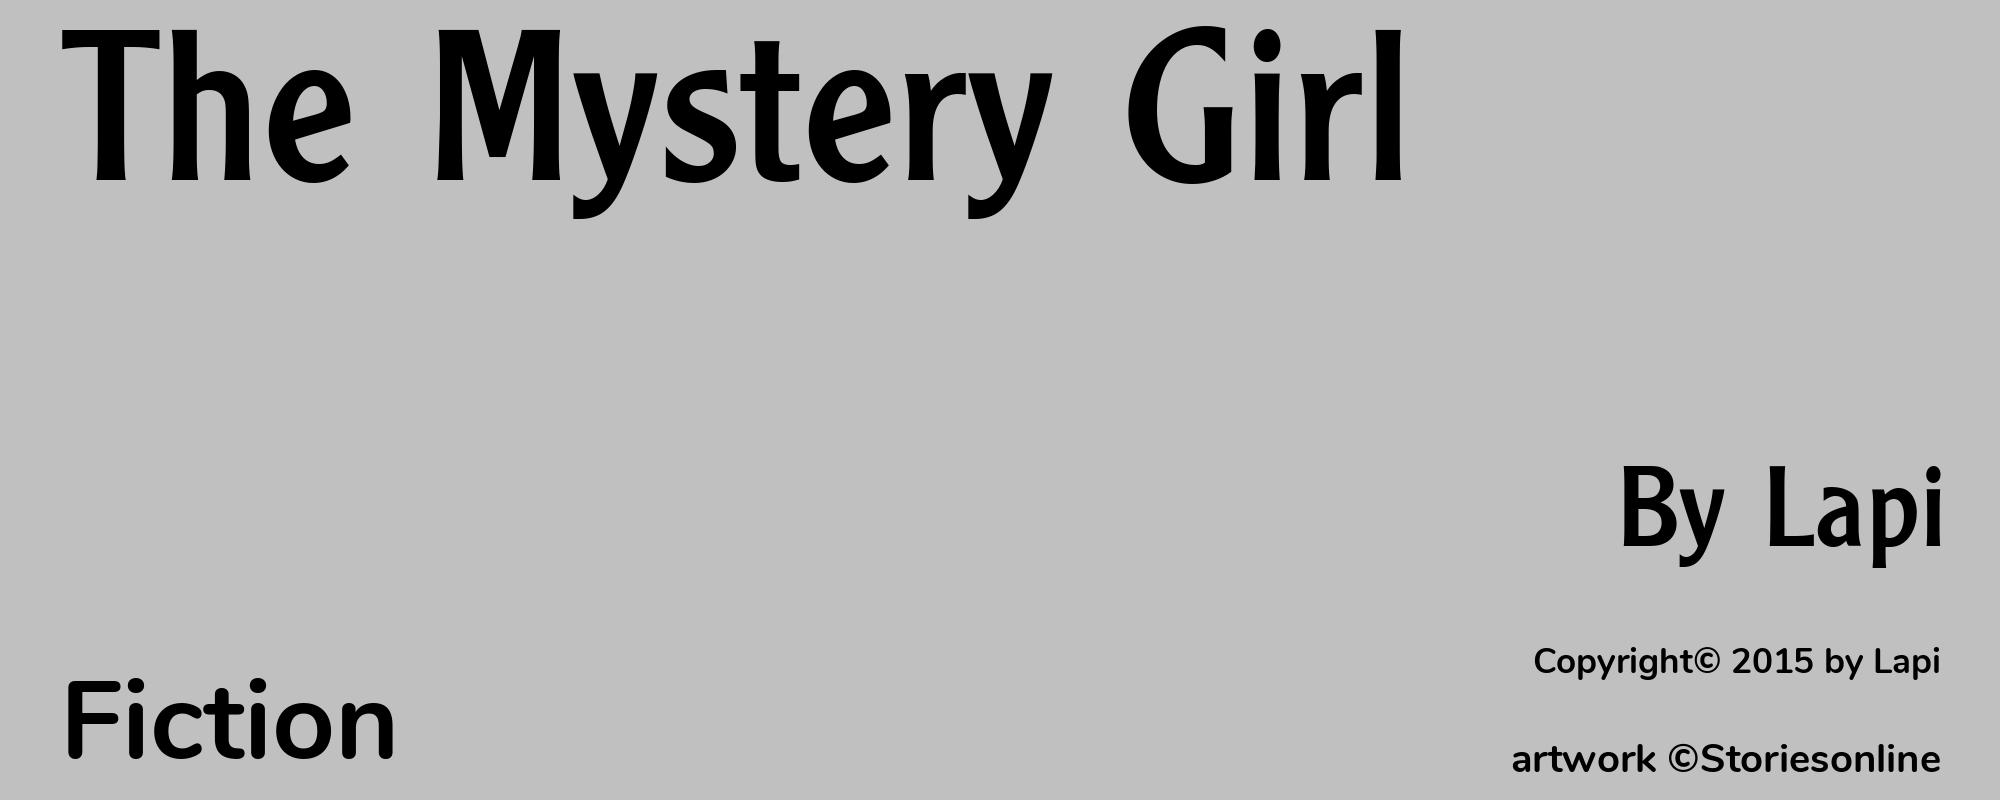 The Mystery Girl - Cover